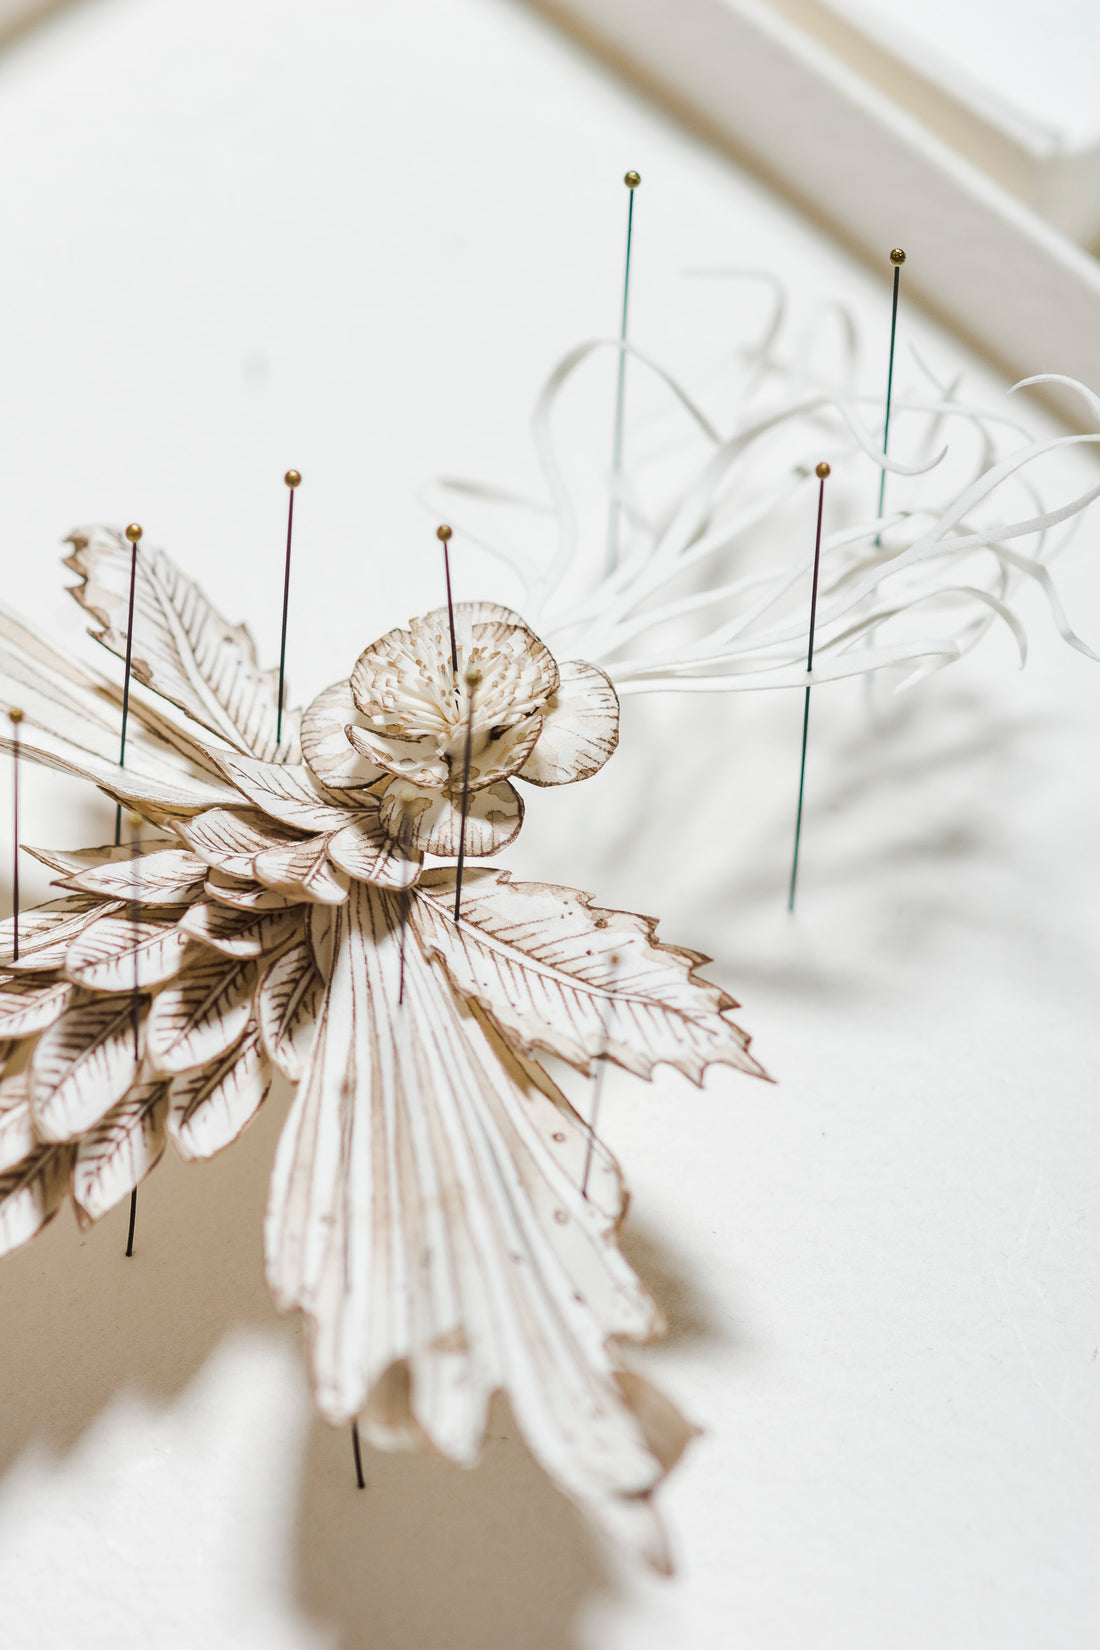 Colleen Southwell focuses on the fine detail